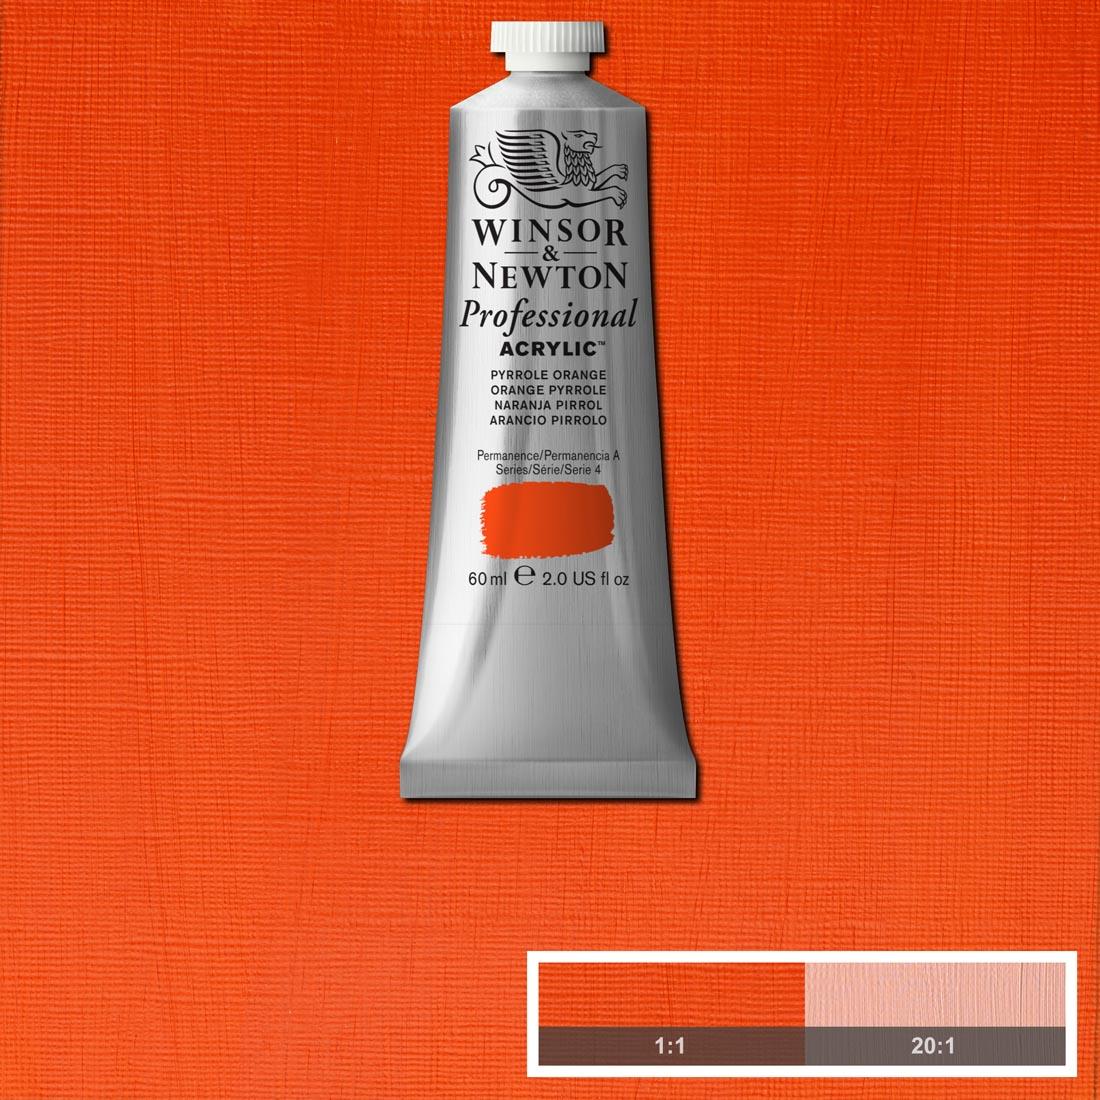 Tube of Pyrrole Orange Winsor and Newton Professional Acrylic with paint swatch in the background